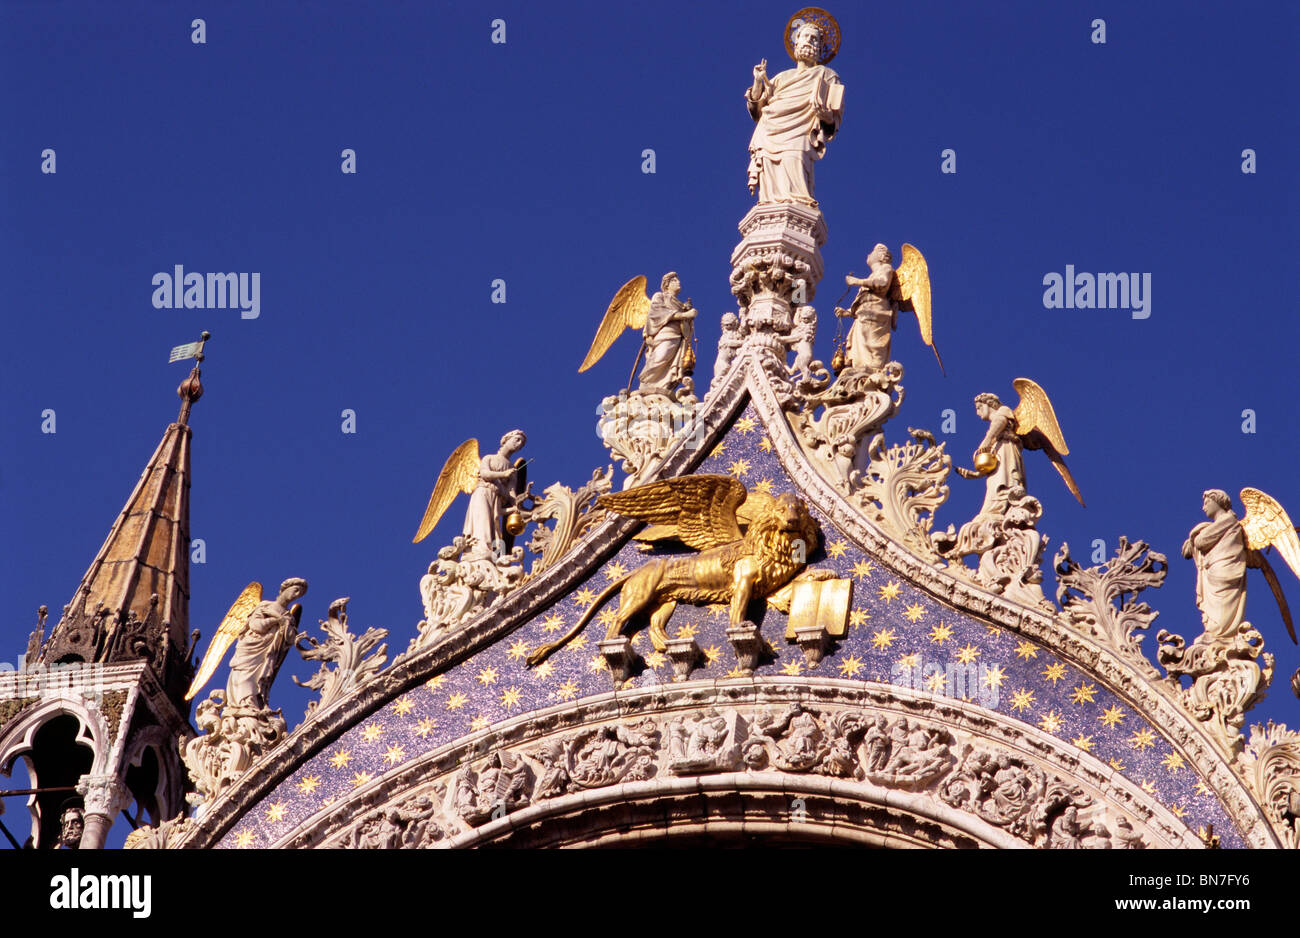 Italy. Venice. July 2008. St Mark's Basilica. St Mark, the Winged Lion, holds the book quoting “Pax Tibi Marce Evangelista Meus” Stock Photo